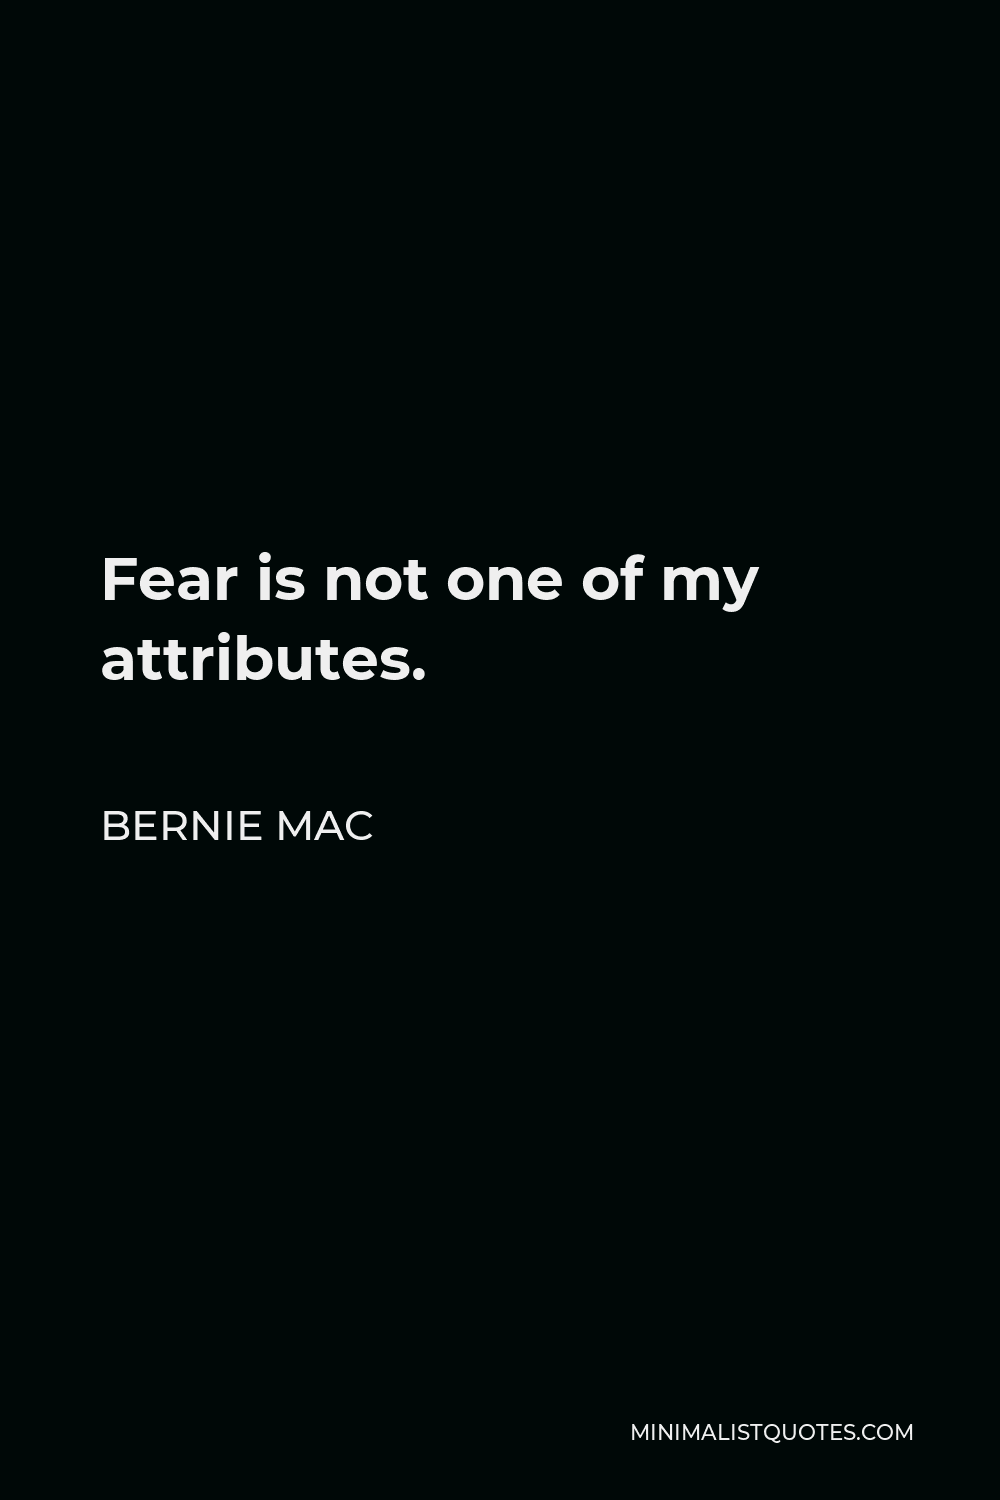 Bernie Mac Quote - Fear is not one of my attributes.